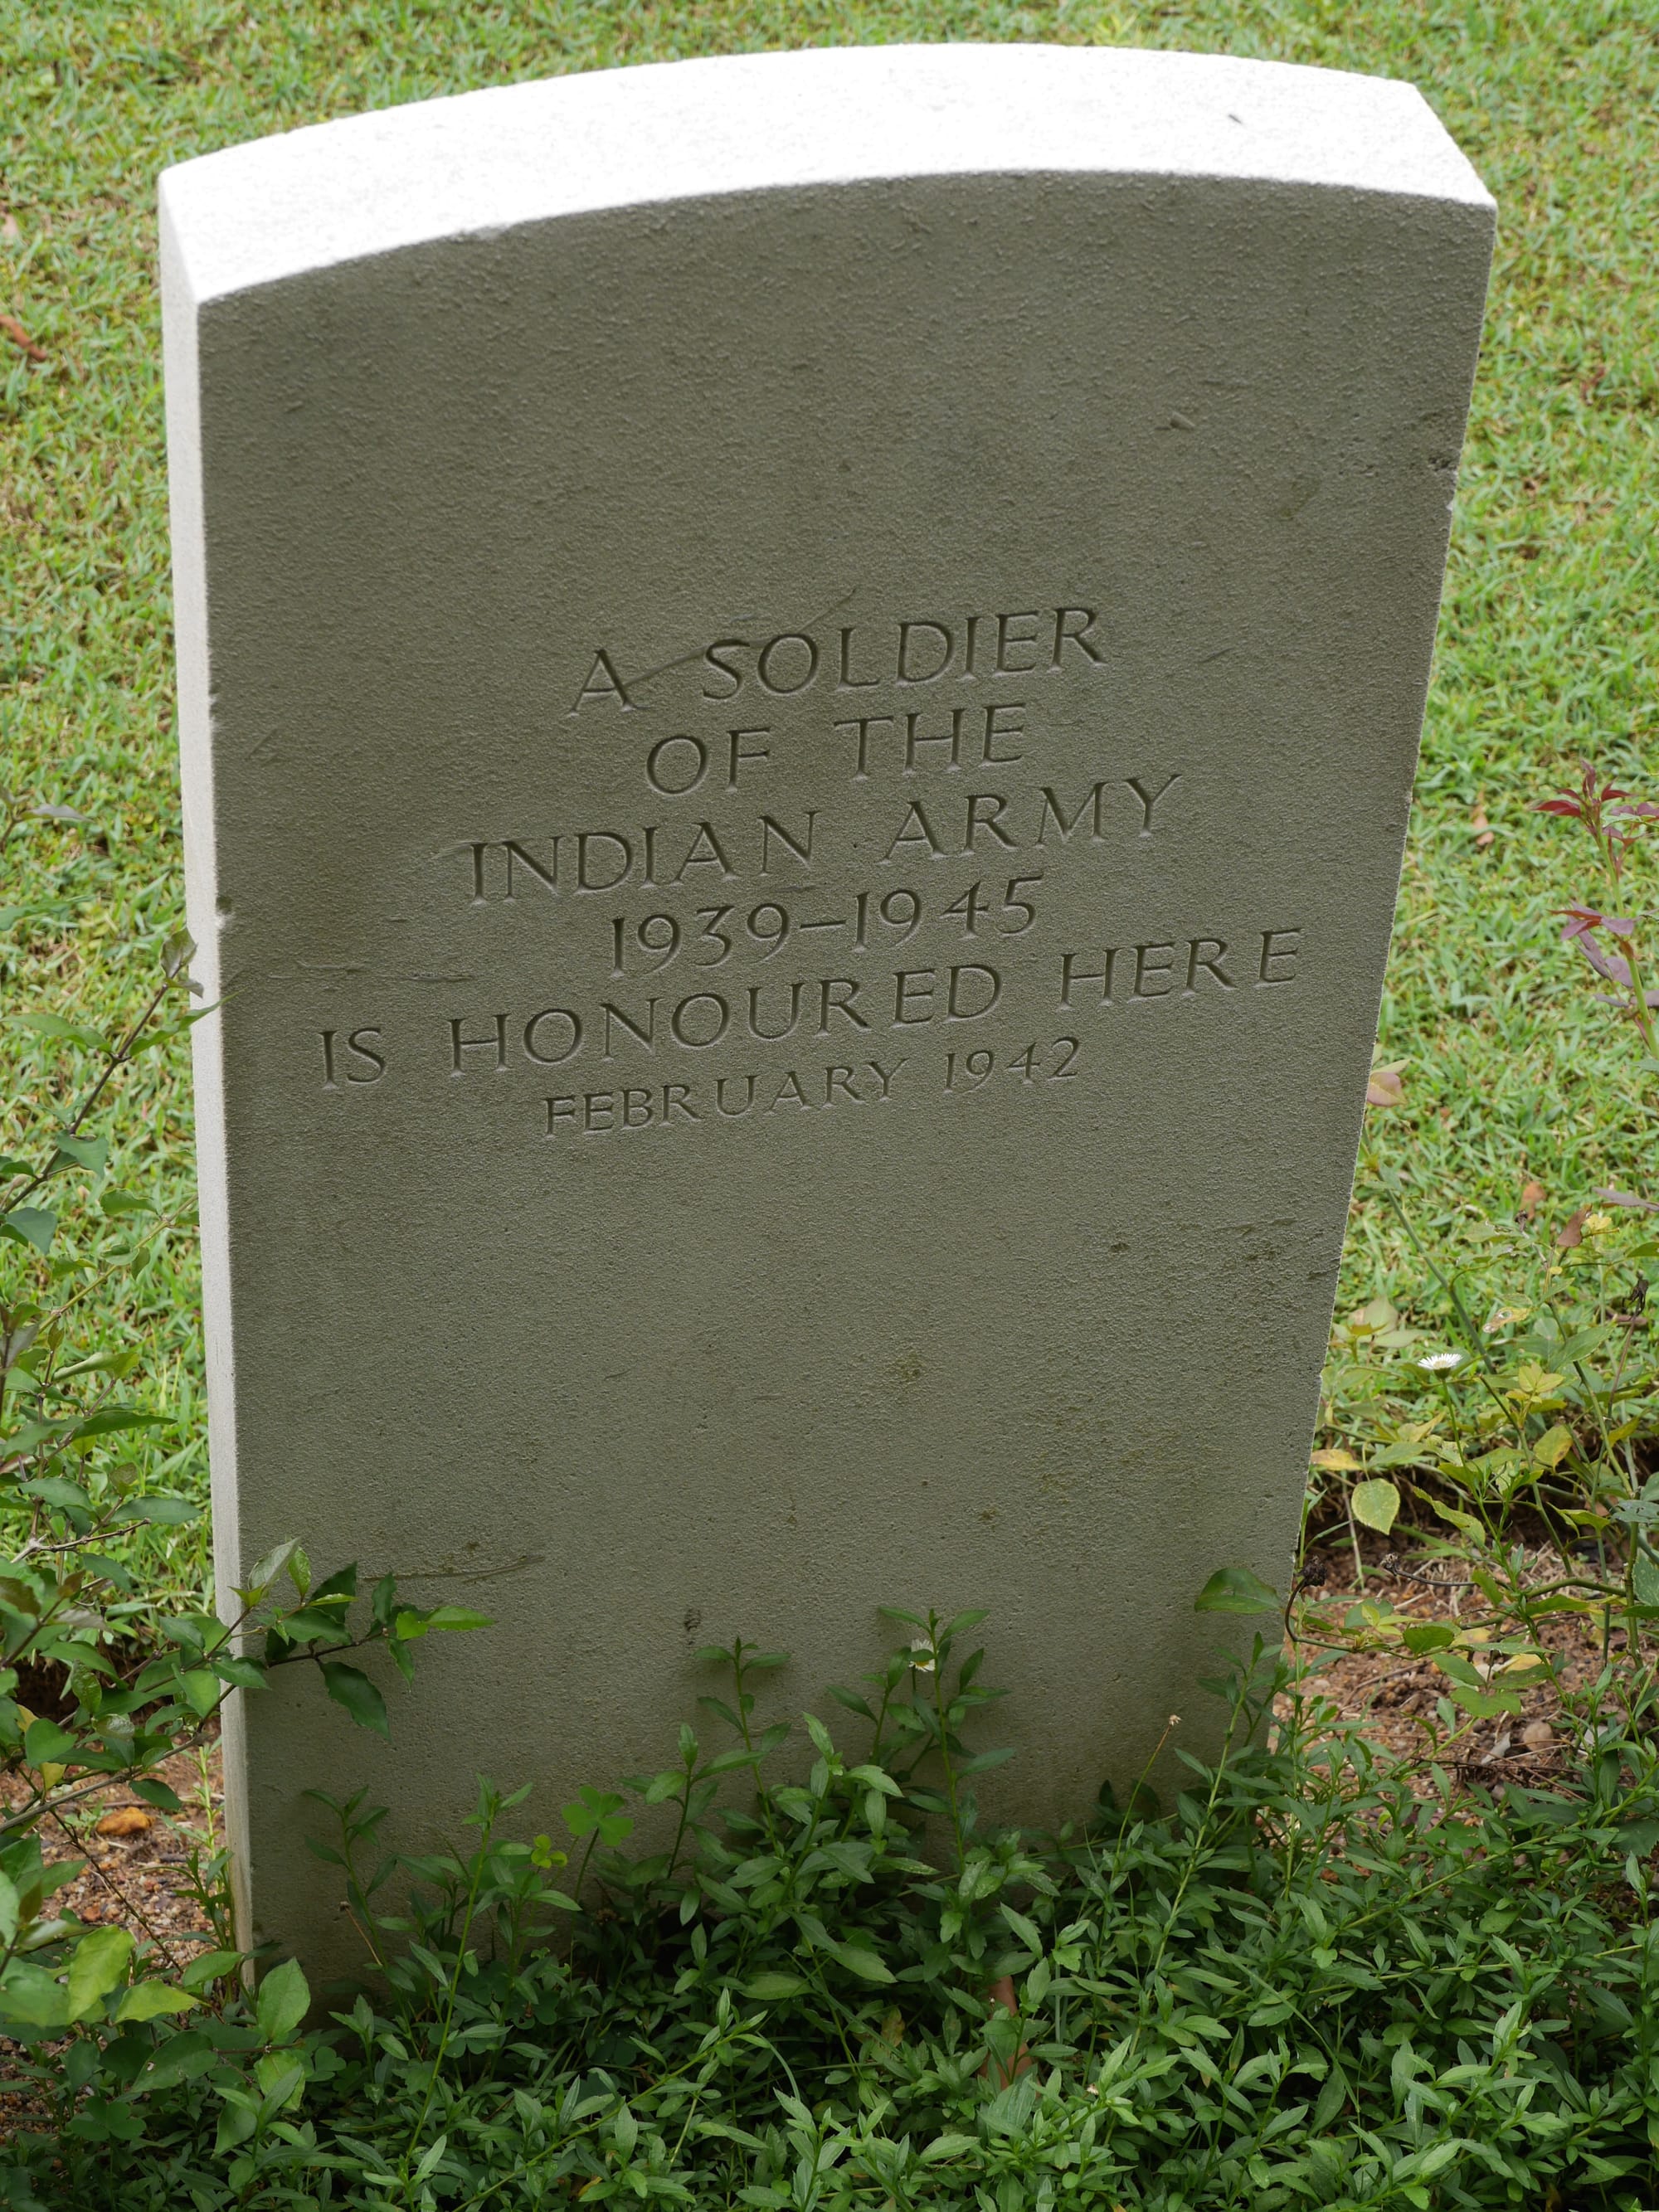 Photo by Author — unknown soldier of Indian Army — Kranji War Memorial, Singapore